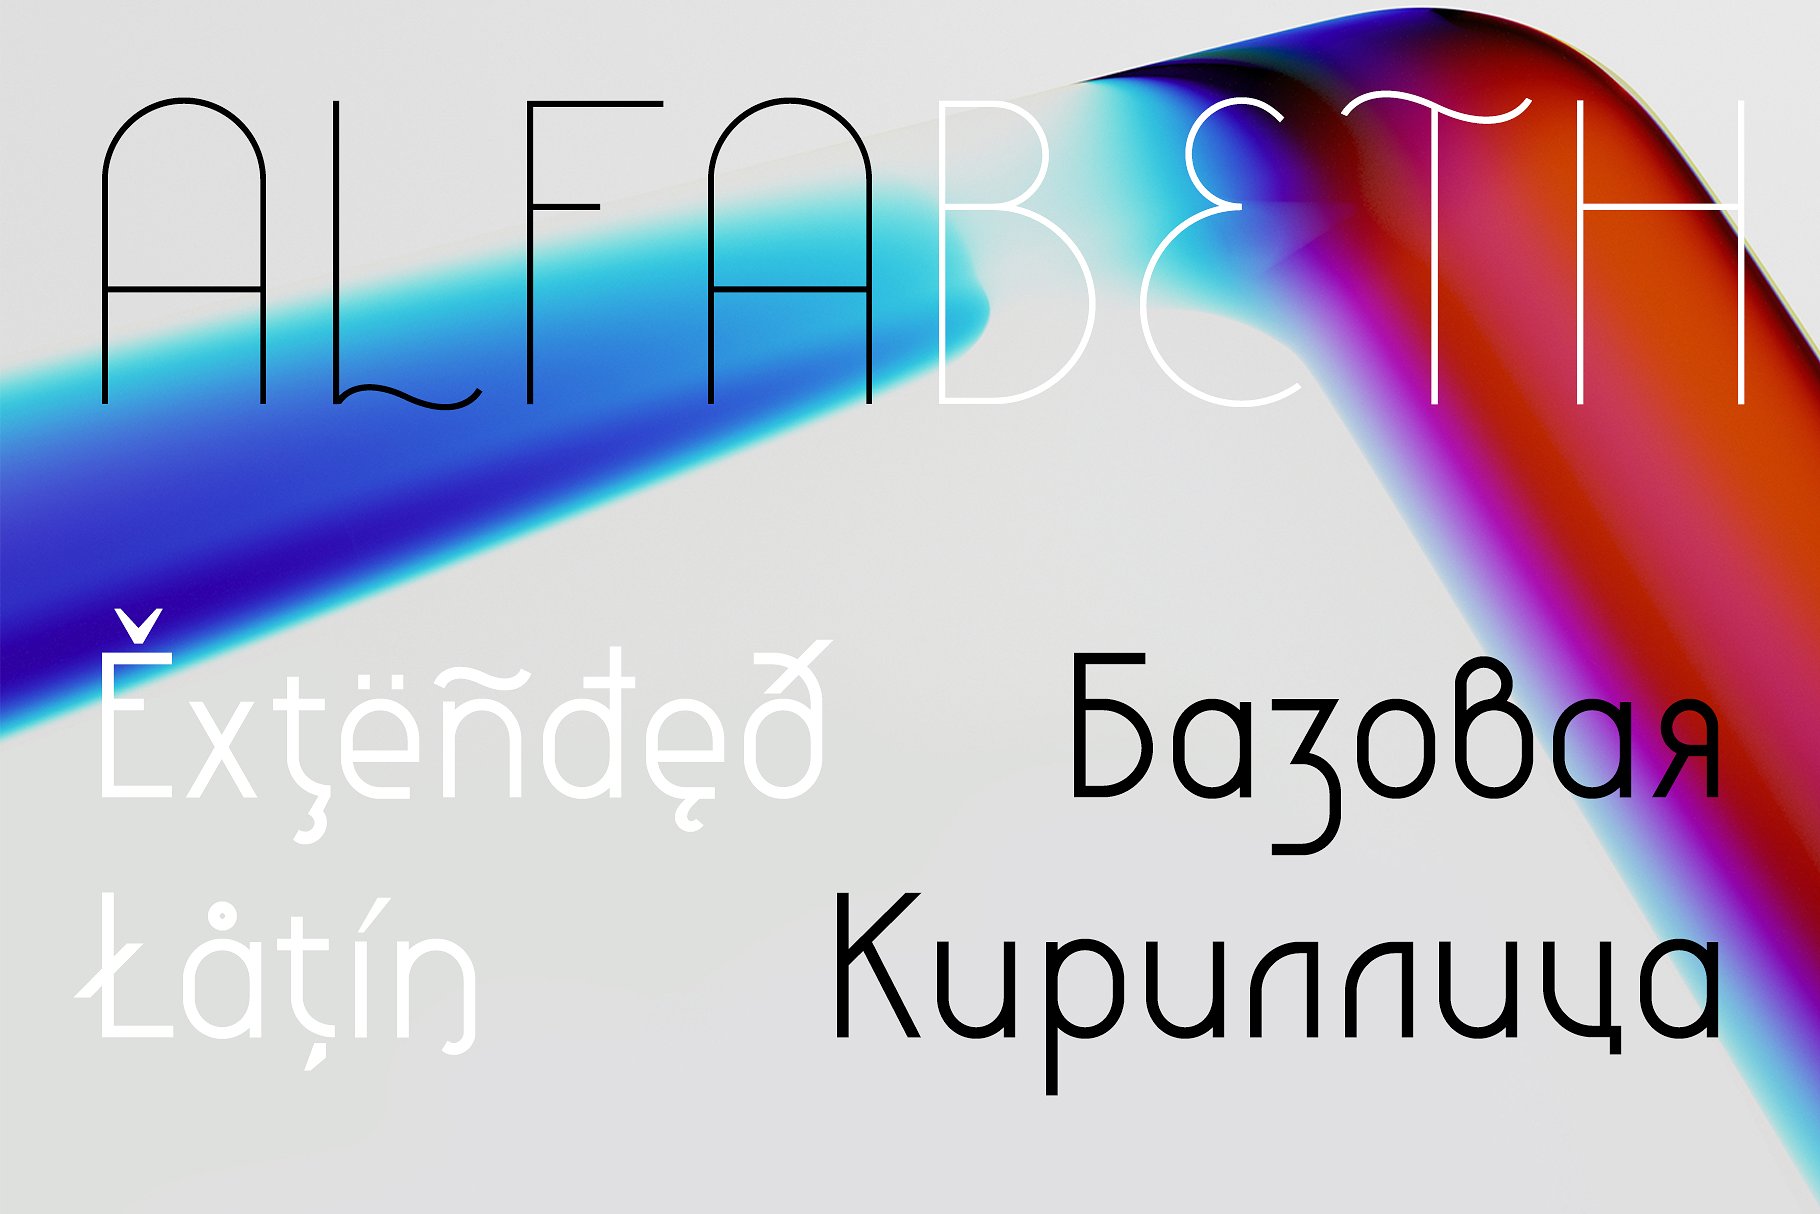 Liberal Condensed Bold Font preview